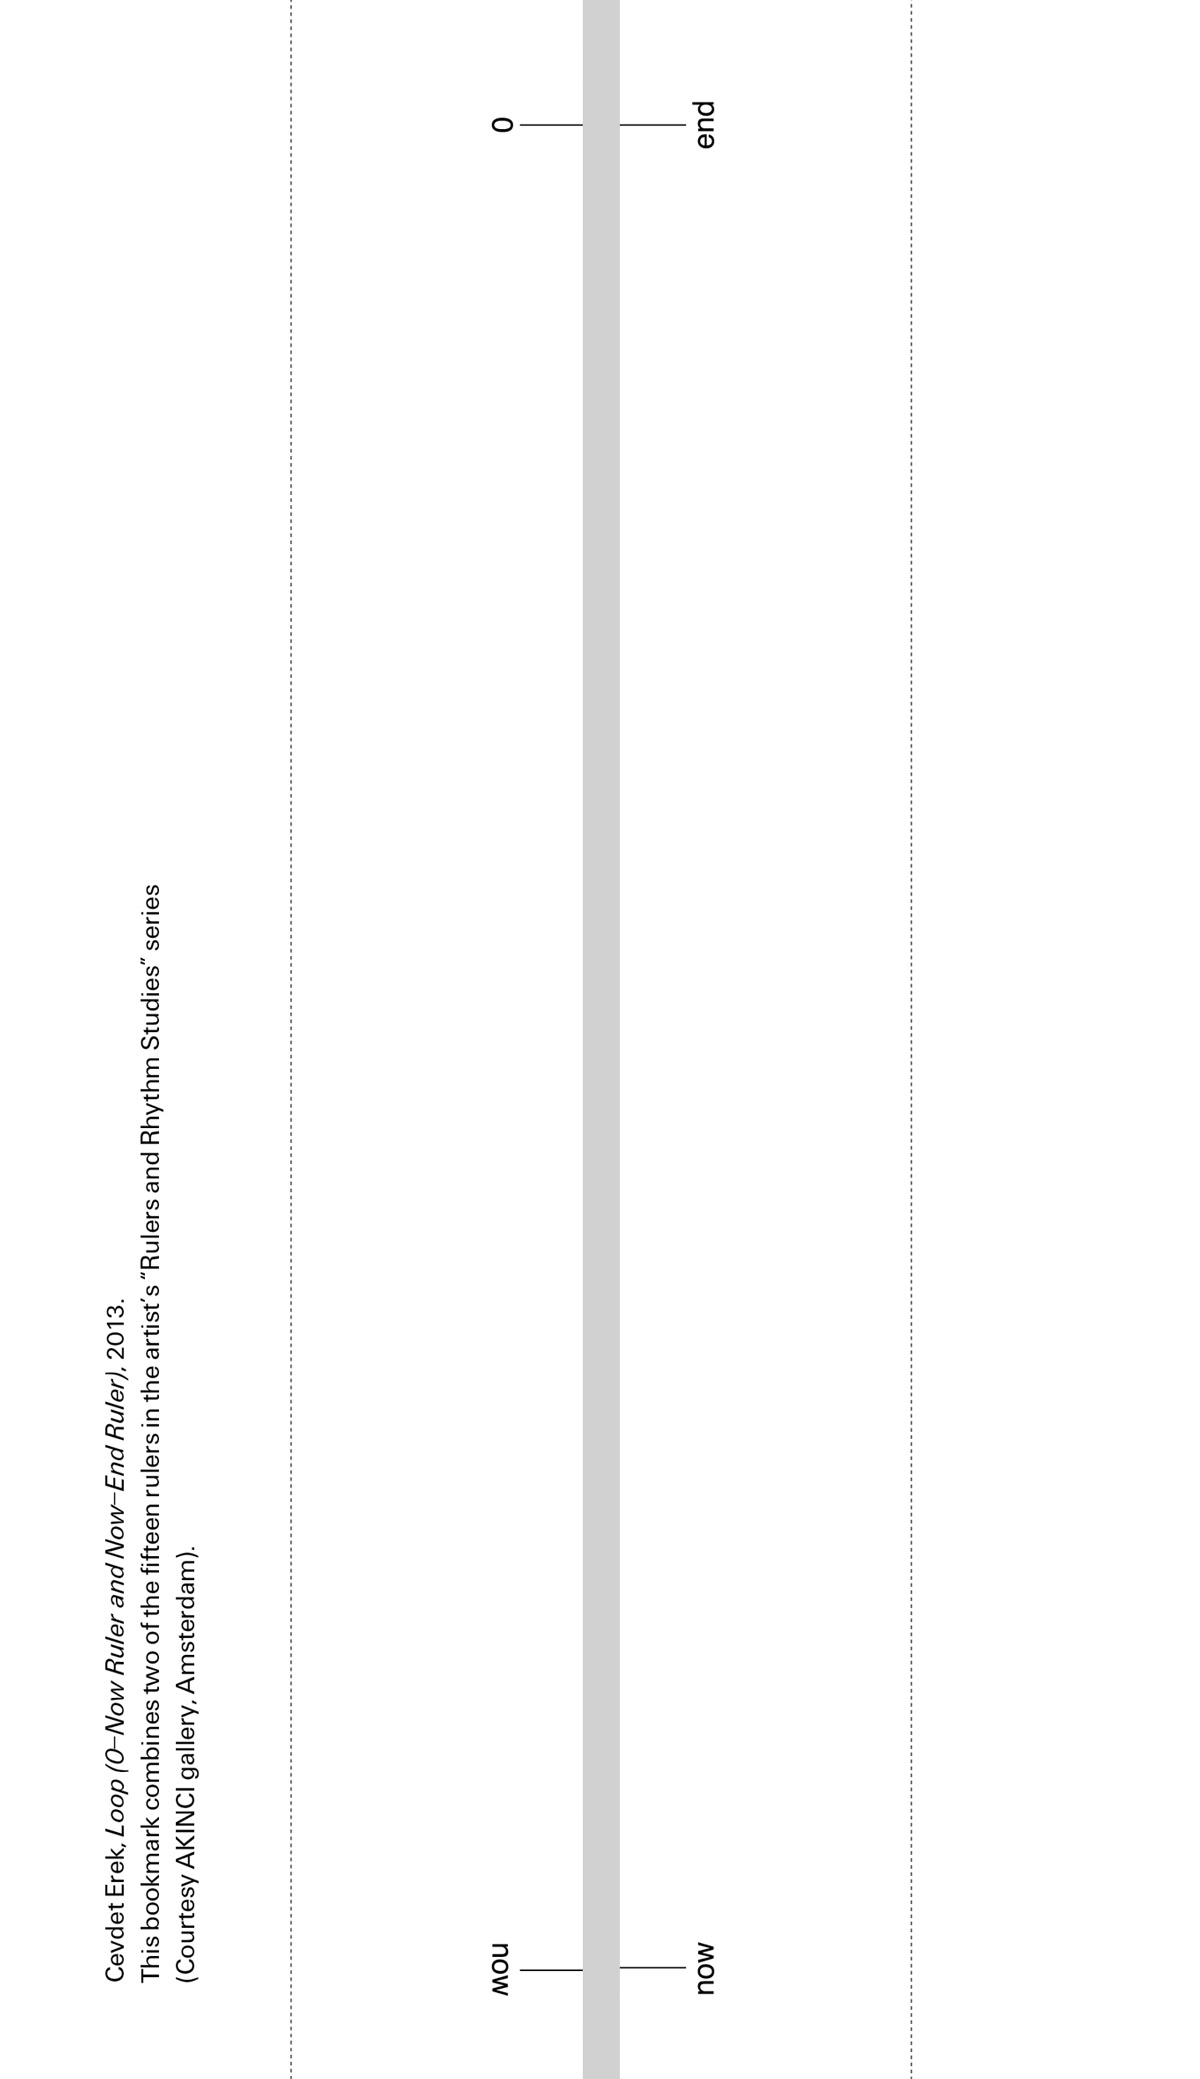 The bookmark from this issue. It is a ruler timeline between “now” and “end”. The text reads: “Cevdet Erek, Loop(0—Now Ruler and Now—End Ruler), 2013. This bookmark combines two of the fifteen rulers in the artist’s “Rulers and Rhythm Studies” series.”